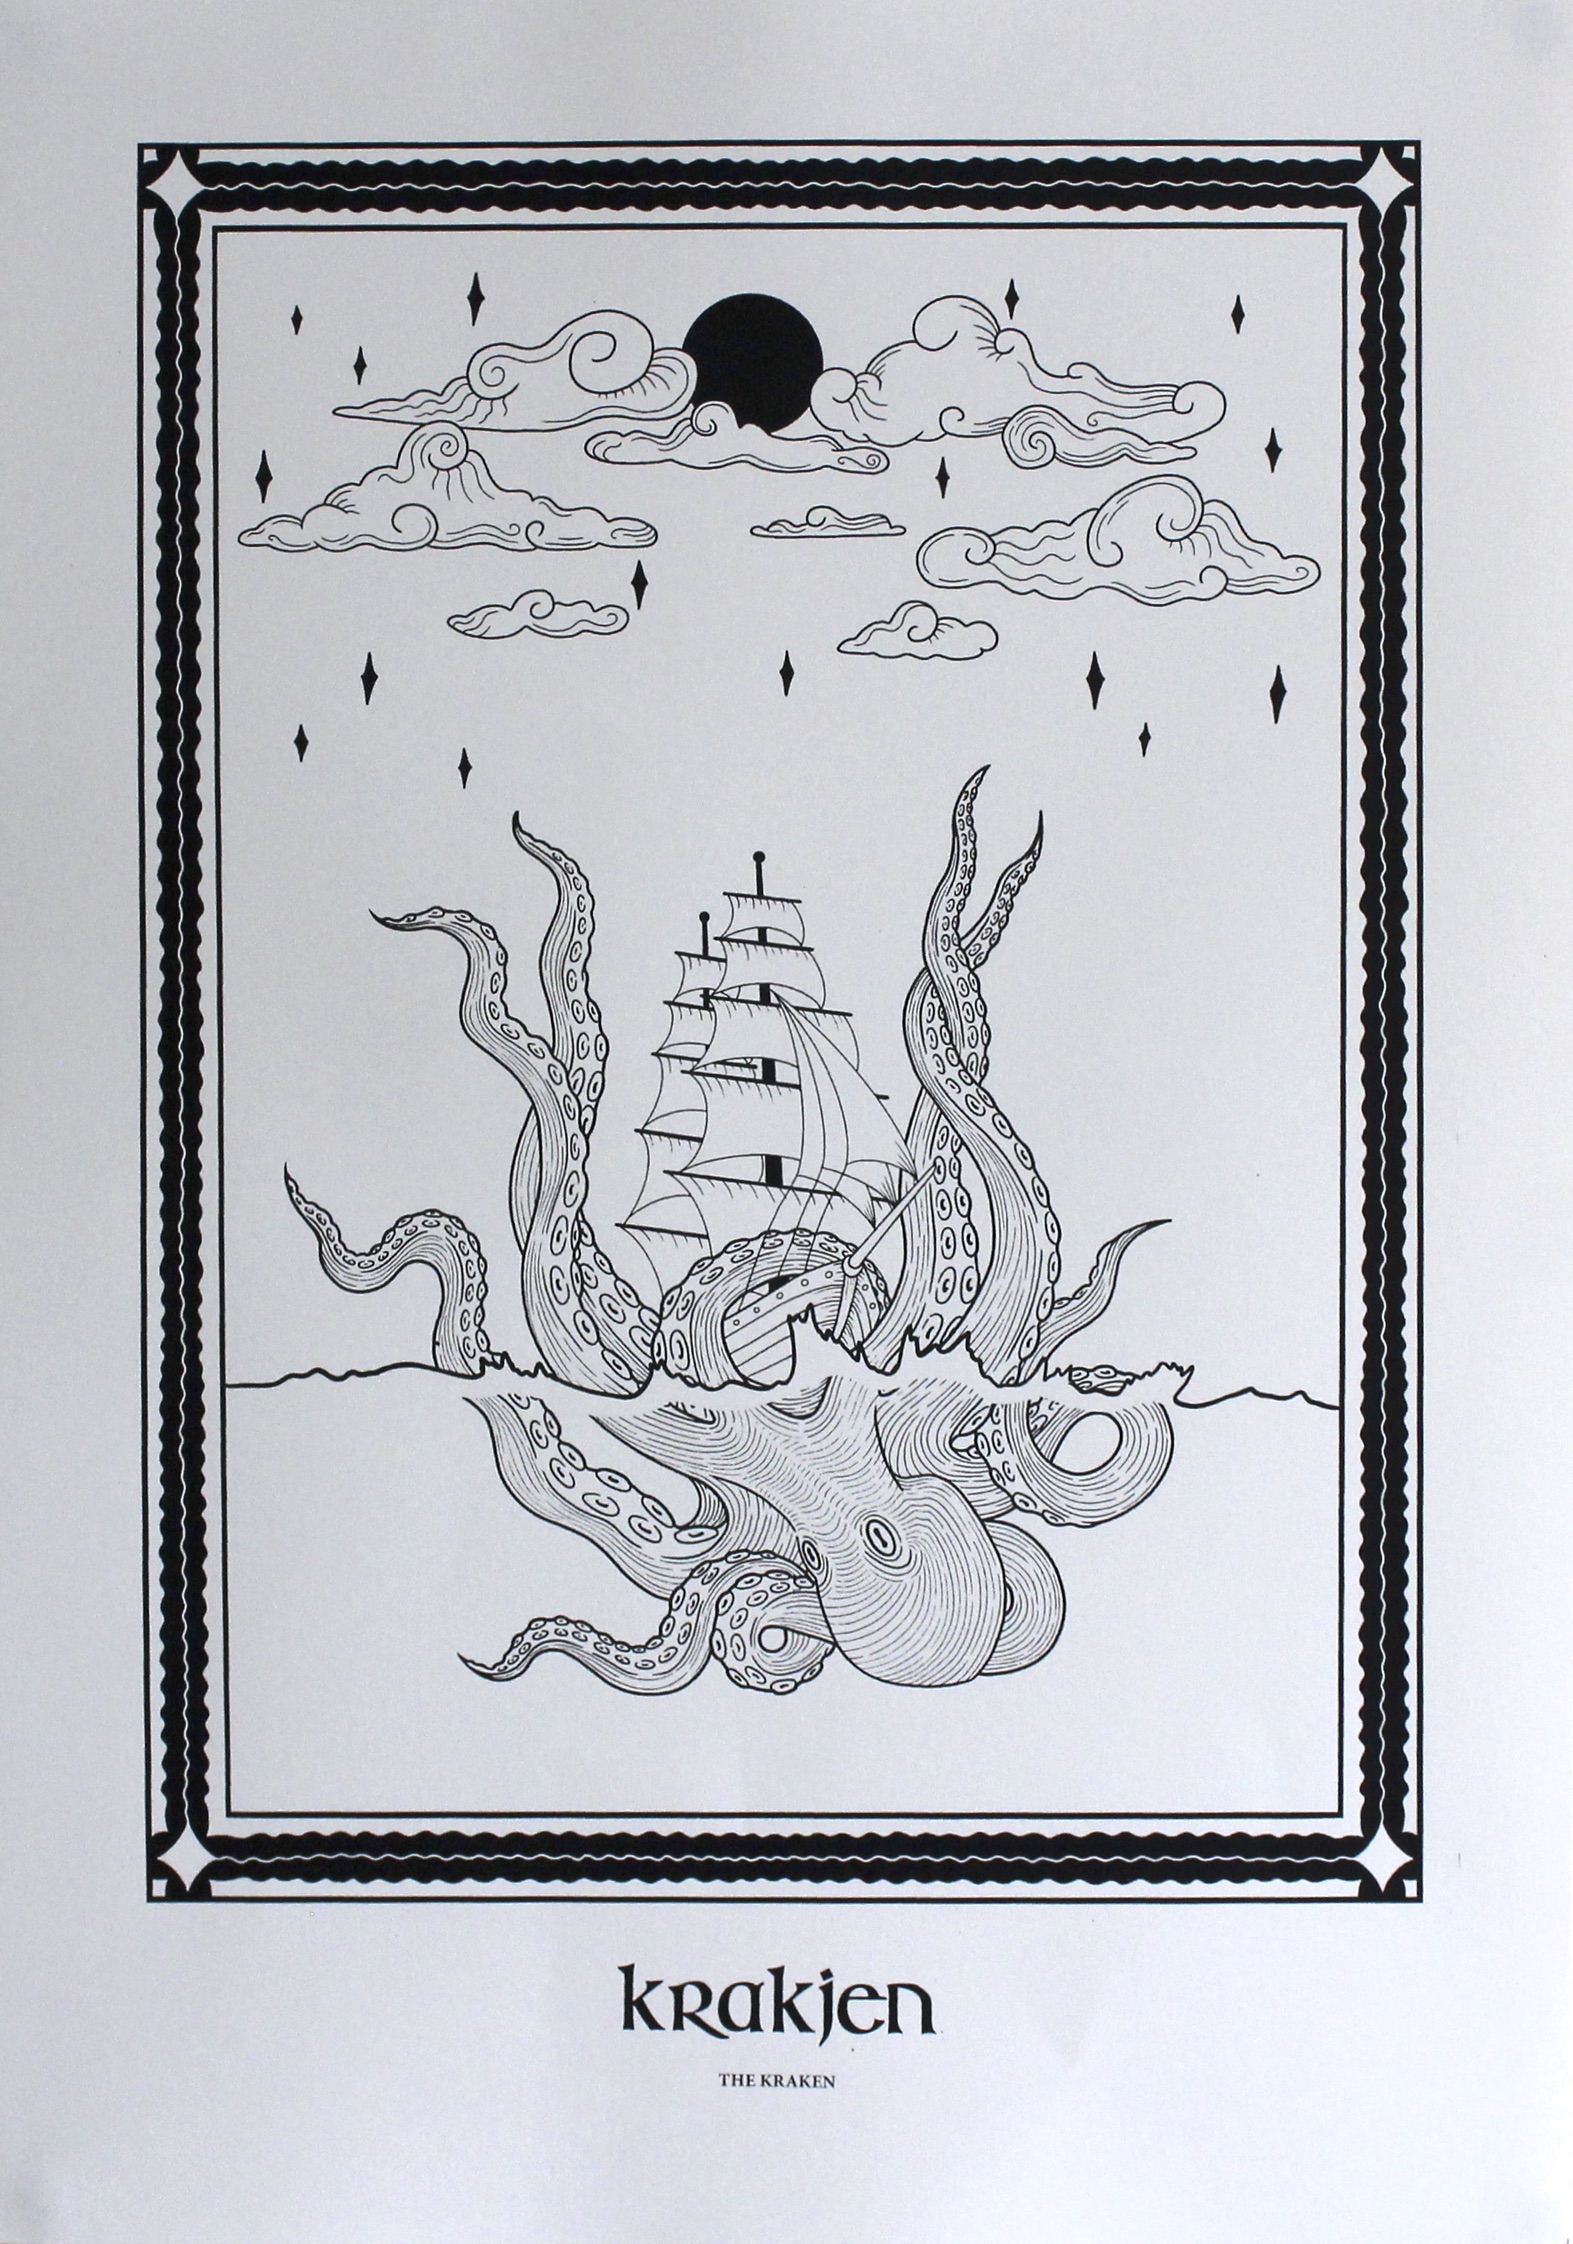 BA Illustration A3 single layered, black ink, screen print on white paper by Marianne Sleiman featuring an illustration of the folkloric creature: the Kraken